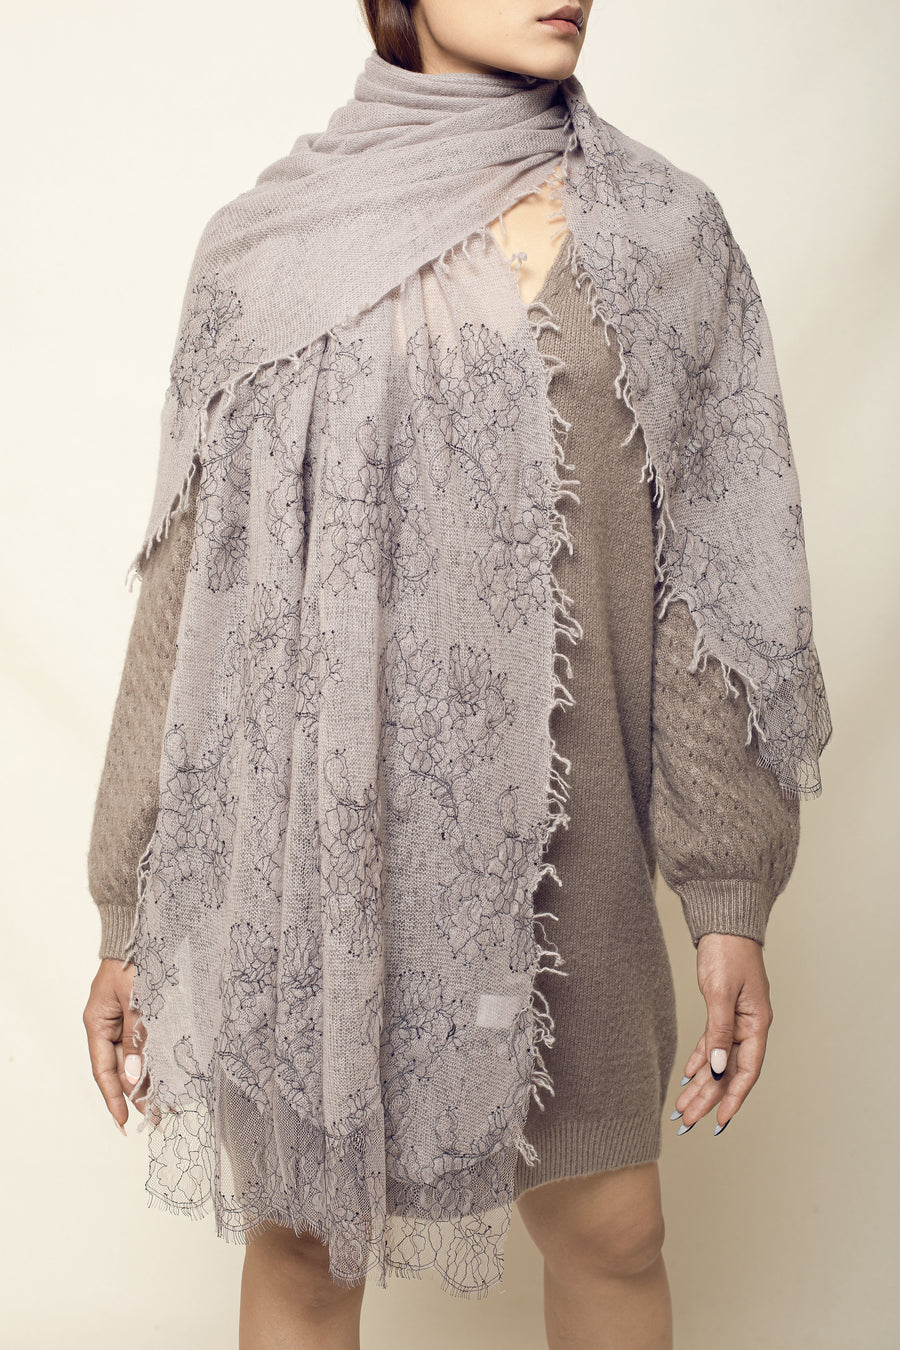 LACE ON LOOSE KNIT STOLE